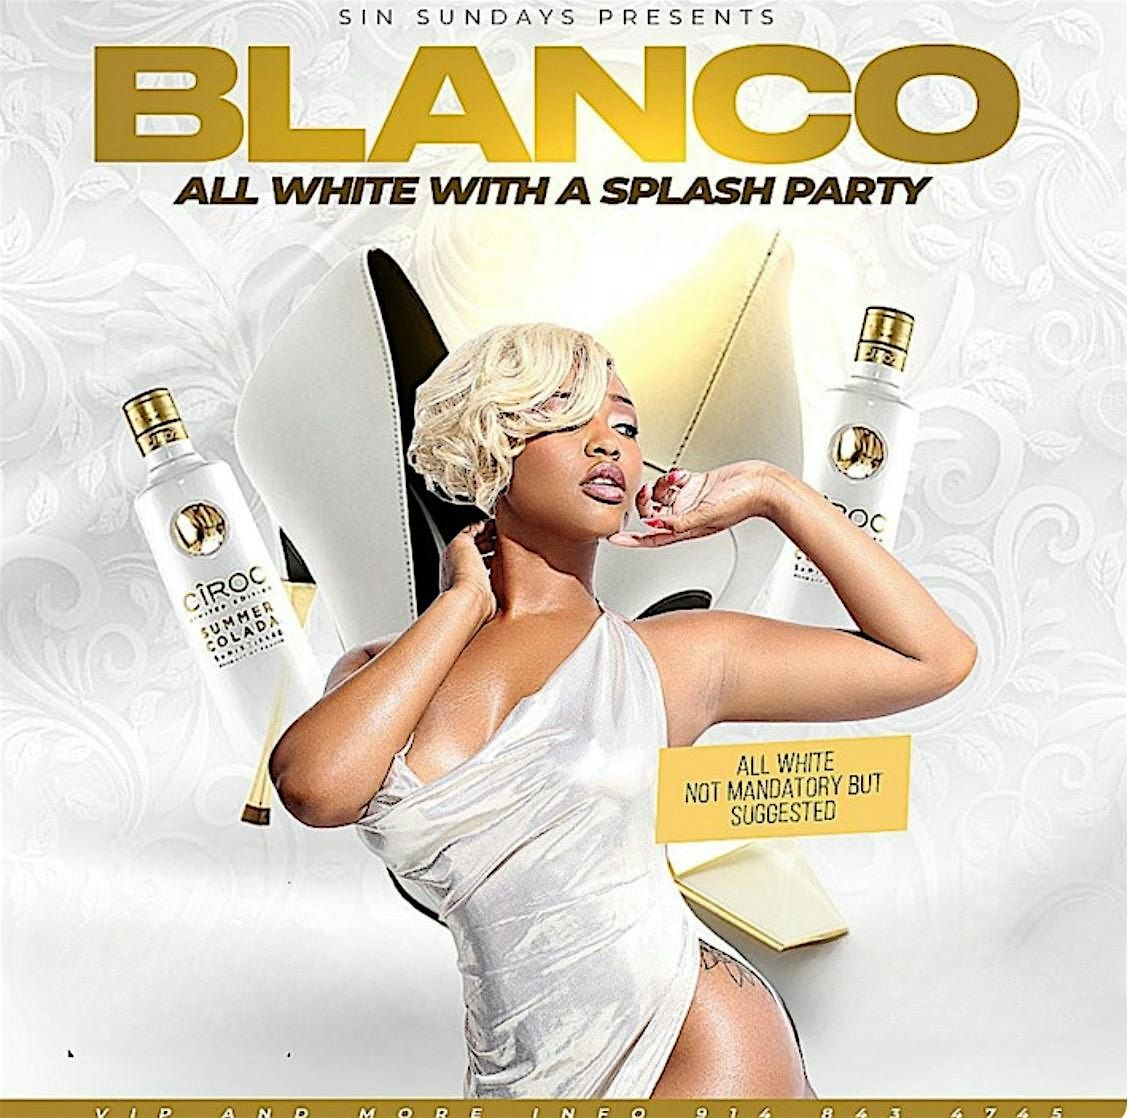 Blanco! Queen City all white day party!